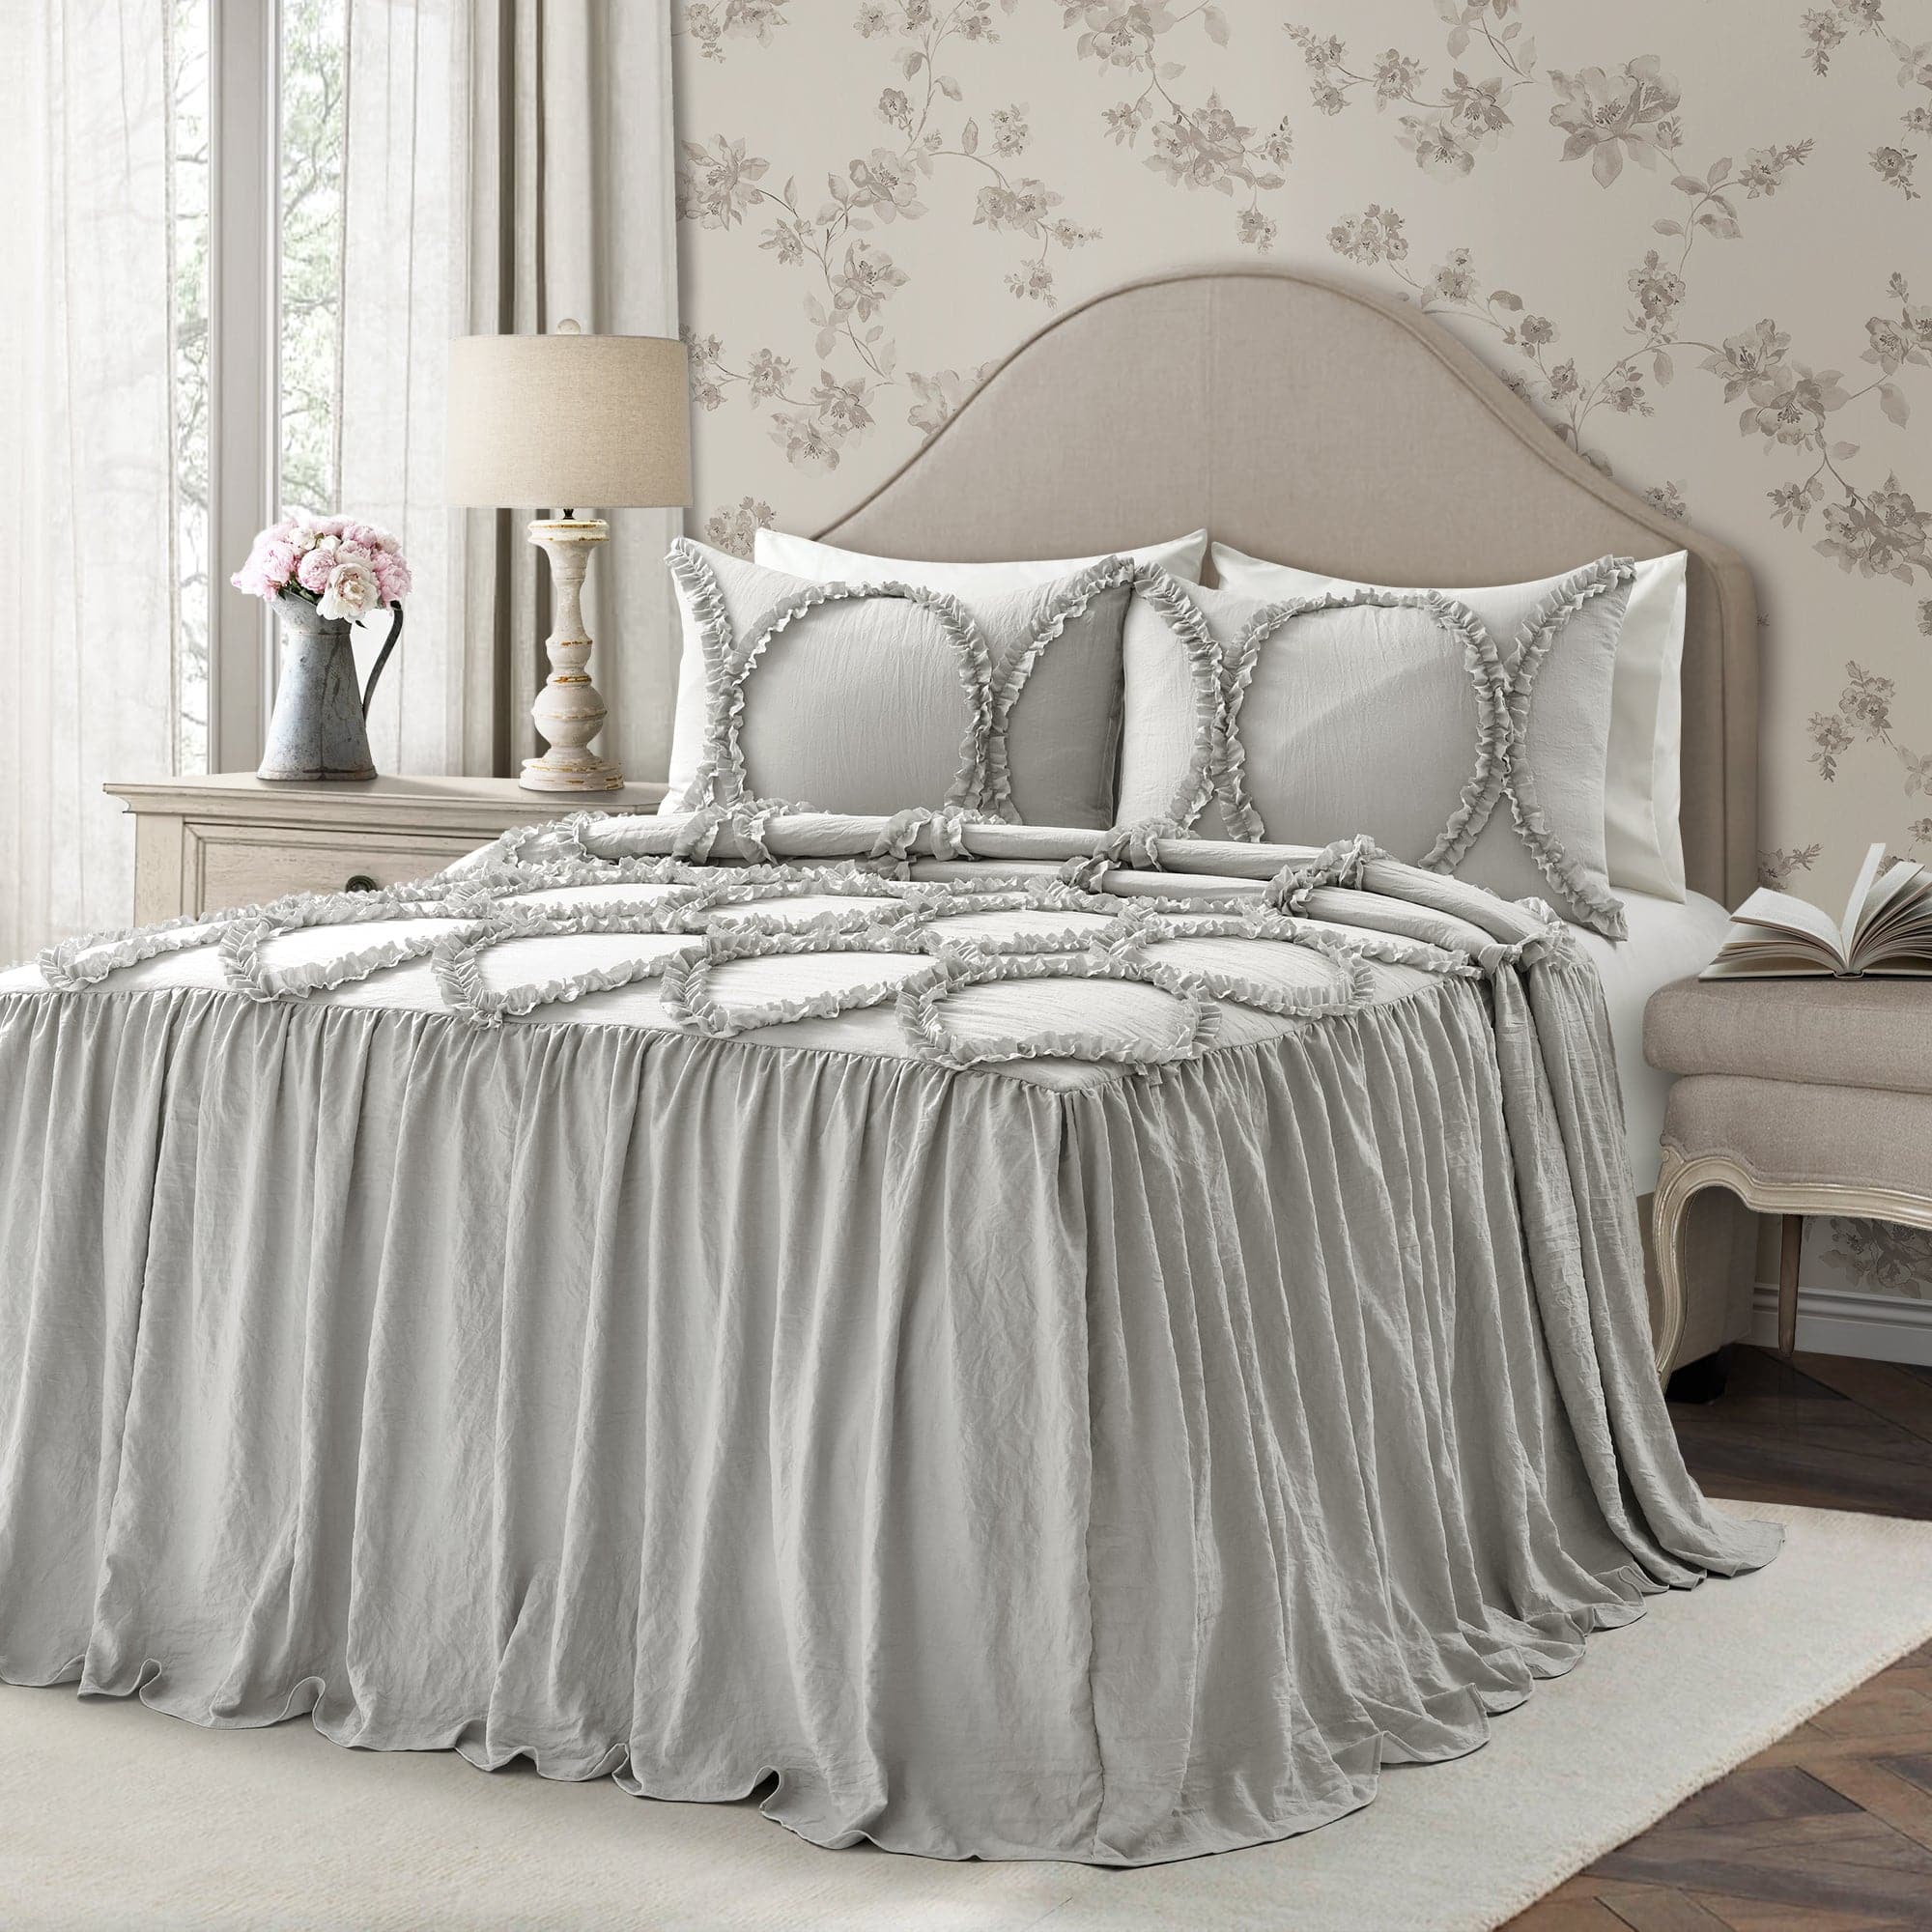 DeeDee's Bundle: Riviera Bedspread + French Country Toile Throw + Velvet Round Pillow